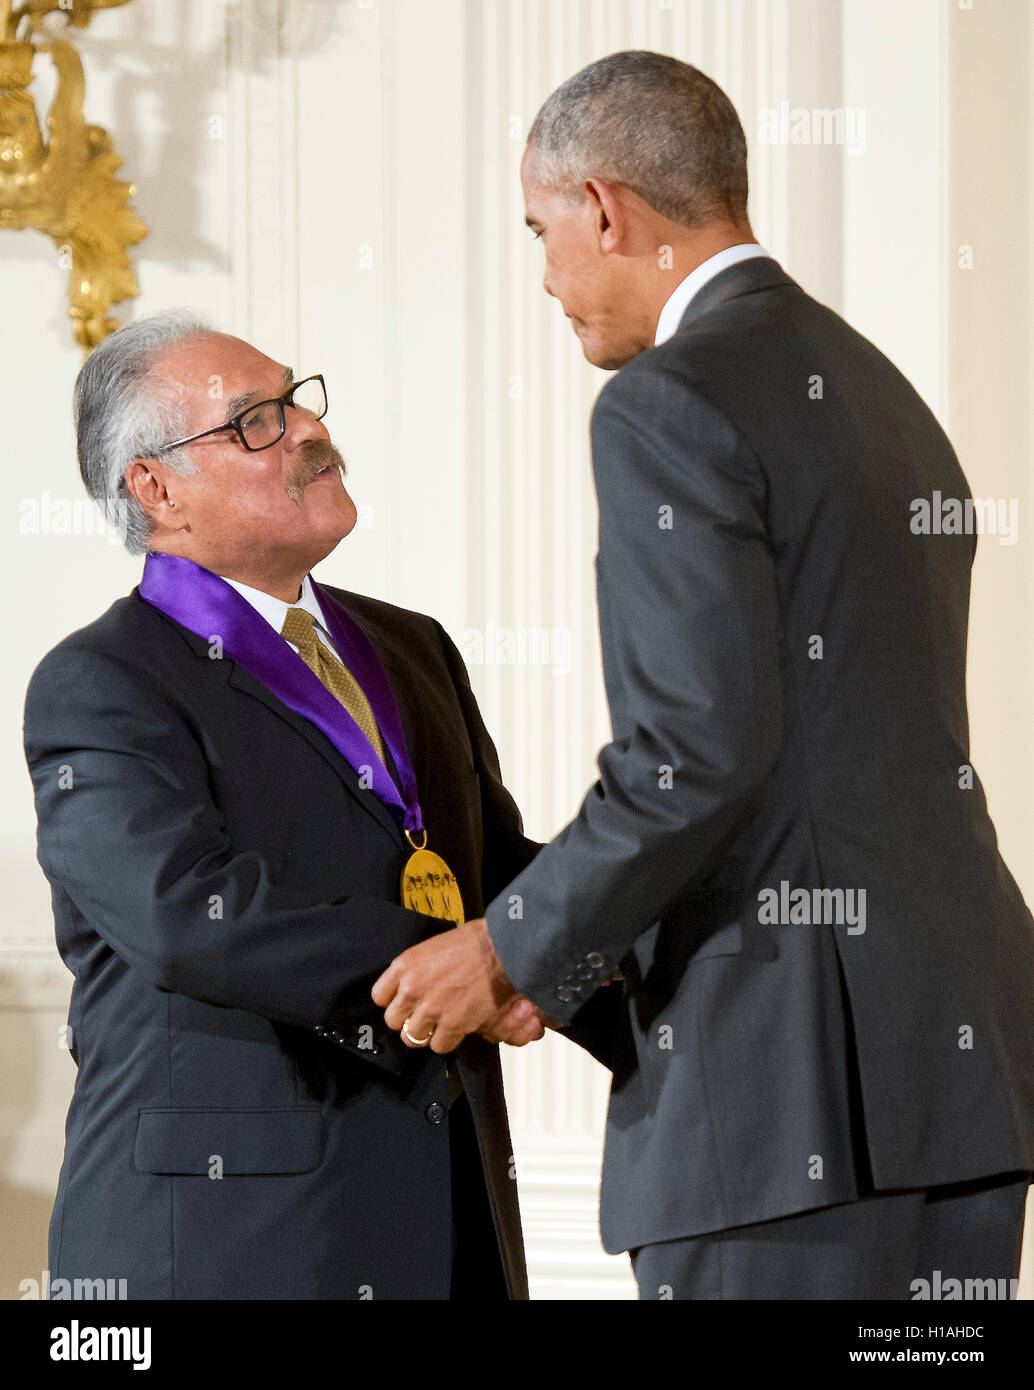 Washington, Us. 22nd Sep, 2016. United States President Barack Obama presents the 2015 National Medal of Arts to Luis Valdez, Playwright, Actor, Writer, & Director of San Juan Bautista, California, during a ceremony in the East Room of the White House in Washington, DC on Thursday, September 22, 2016. Credit: Ron Sachs/CNP - NO WIRE SERVICE - © dpa/Alamy Live News Stock Photo